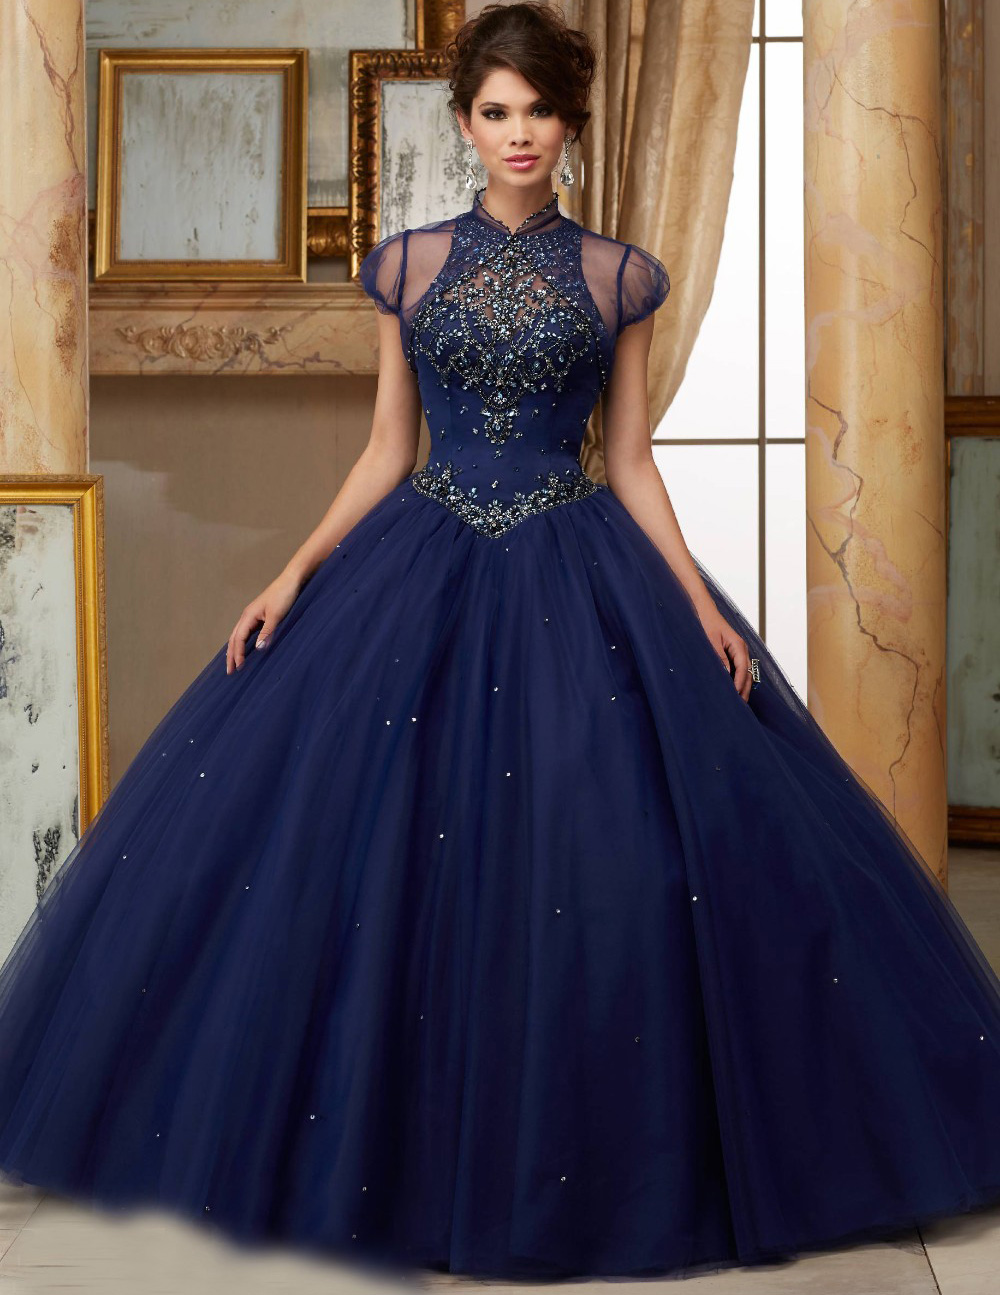 High Quality Navy Blue Ball Gown Promotion-Shop for High Quality ...